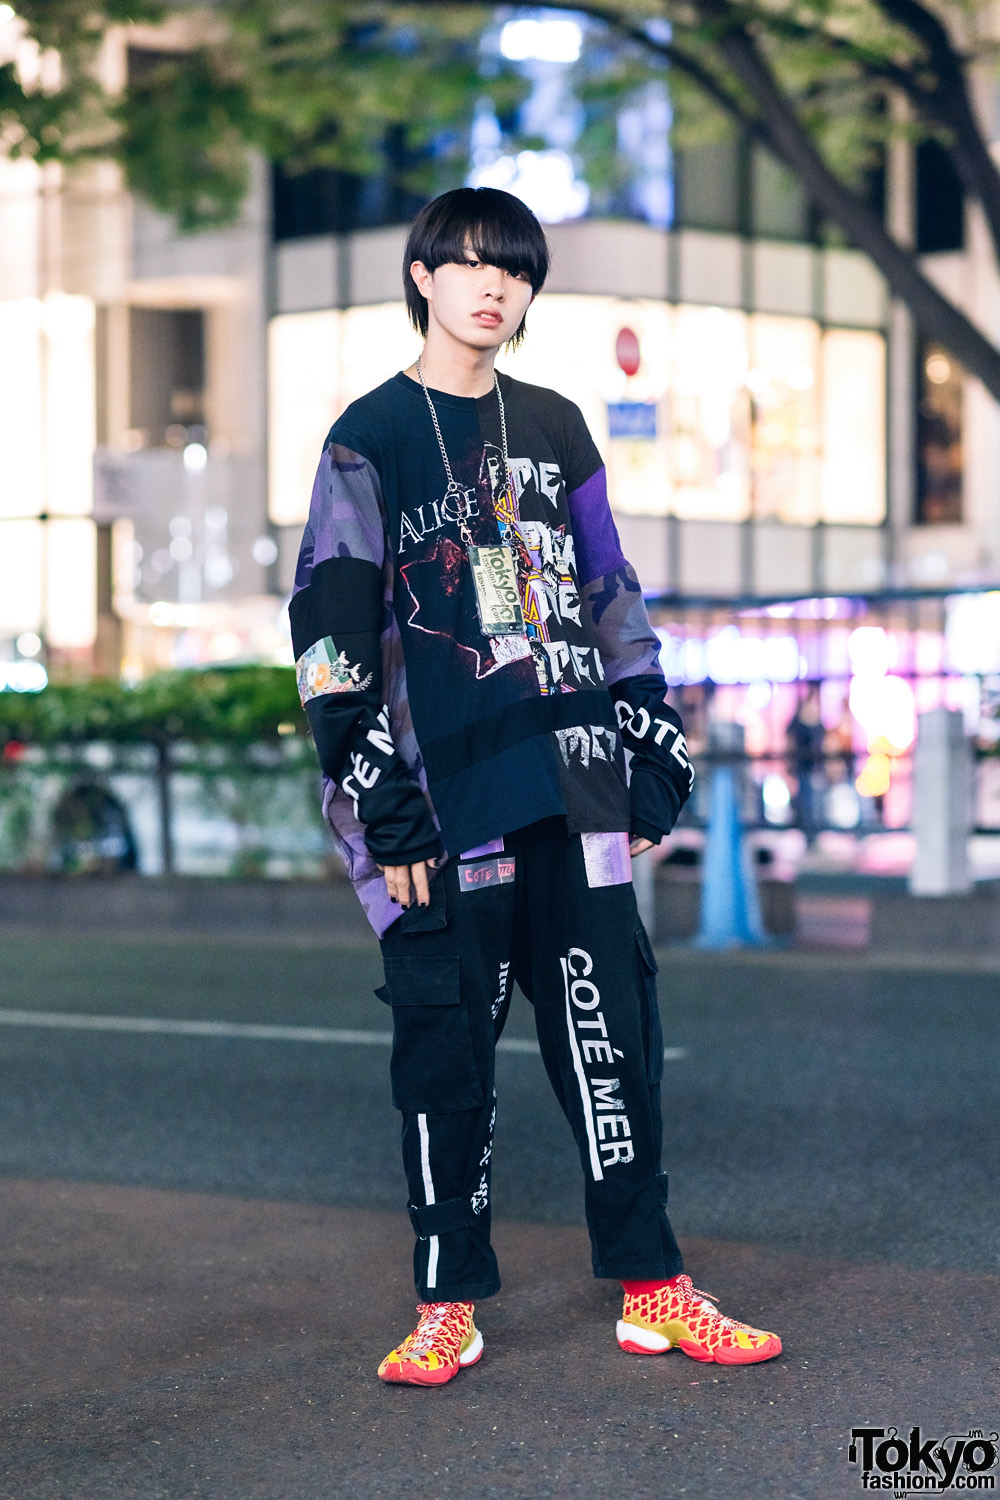 Japanese Teen Model in Cote Mer Graphic Print Streetwear Style w/ Blunt Bob, Mobile Chain Necklace & Adidas x Pharrel Williams Chinese New Year Sneakers